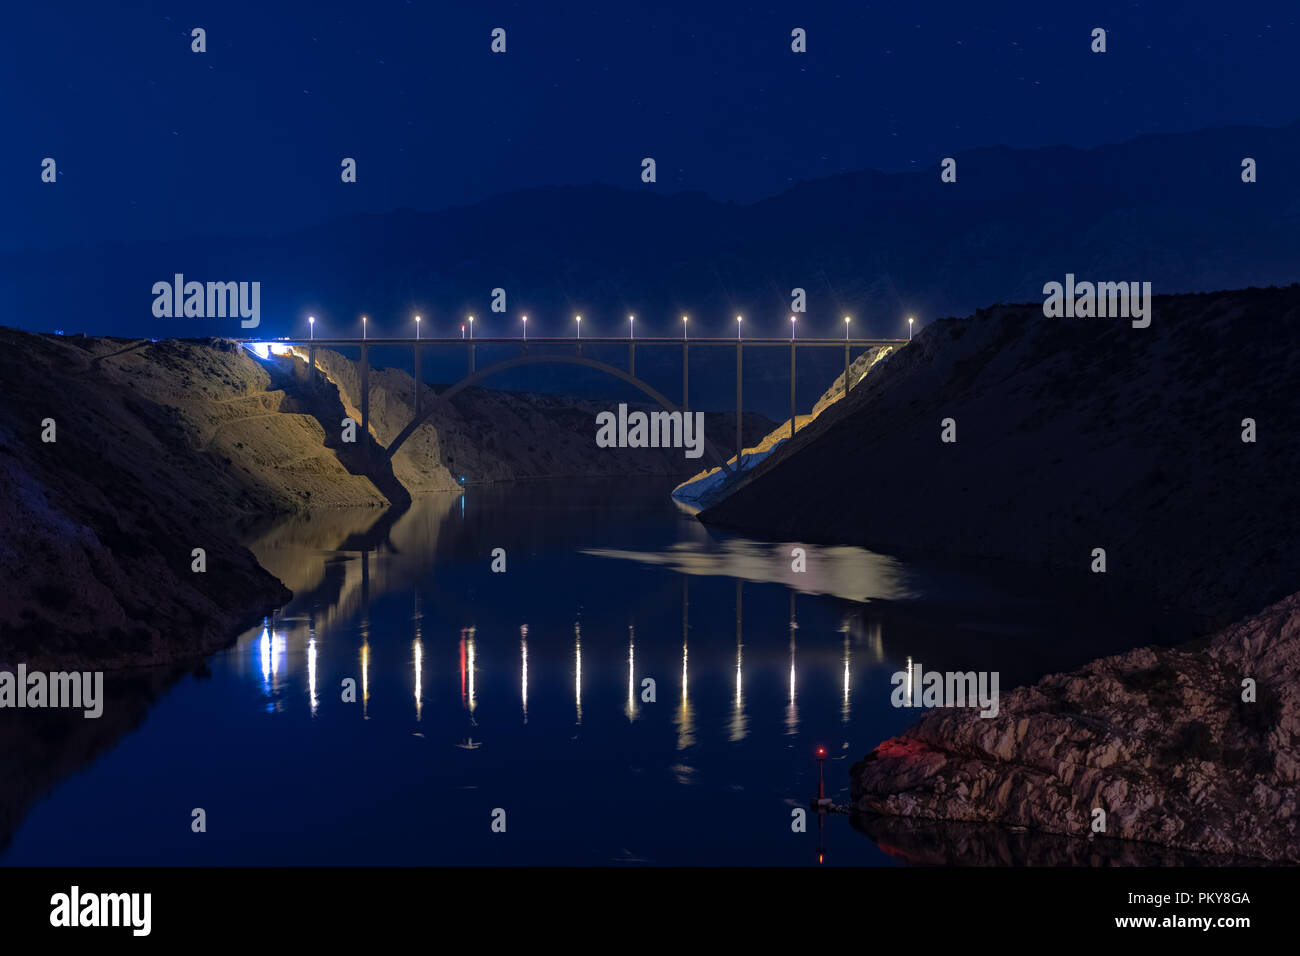 Illuminated highway bridge under stars, reflection of lights in water, mountains in background and bright stars in sky Stock Photo